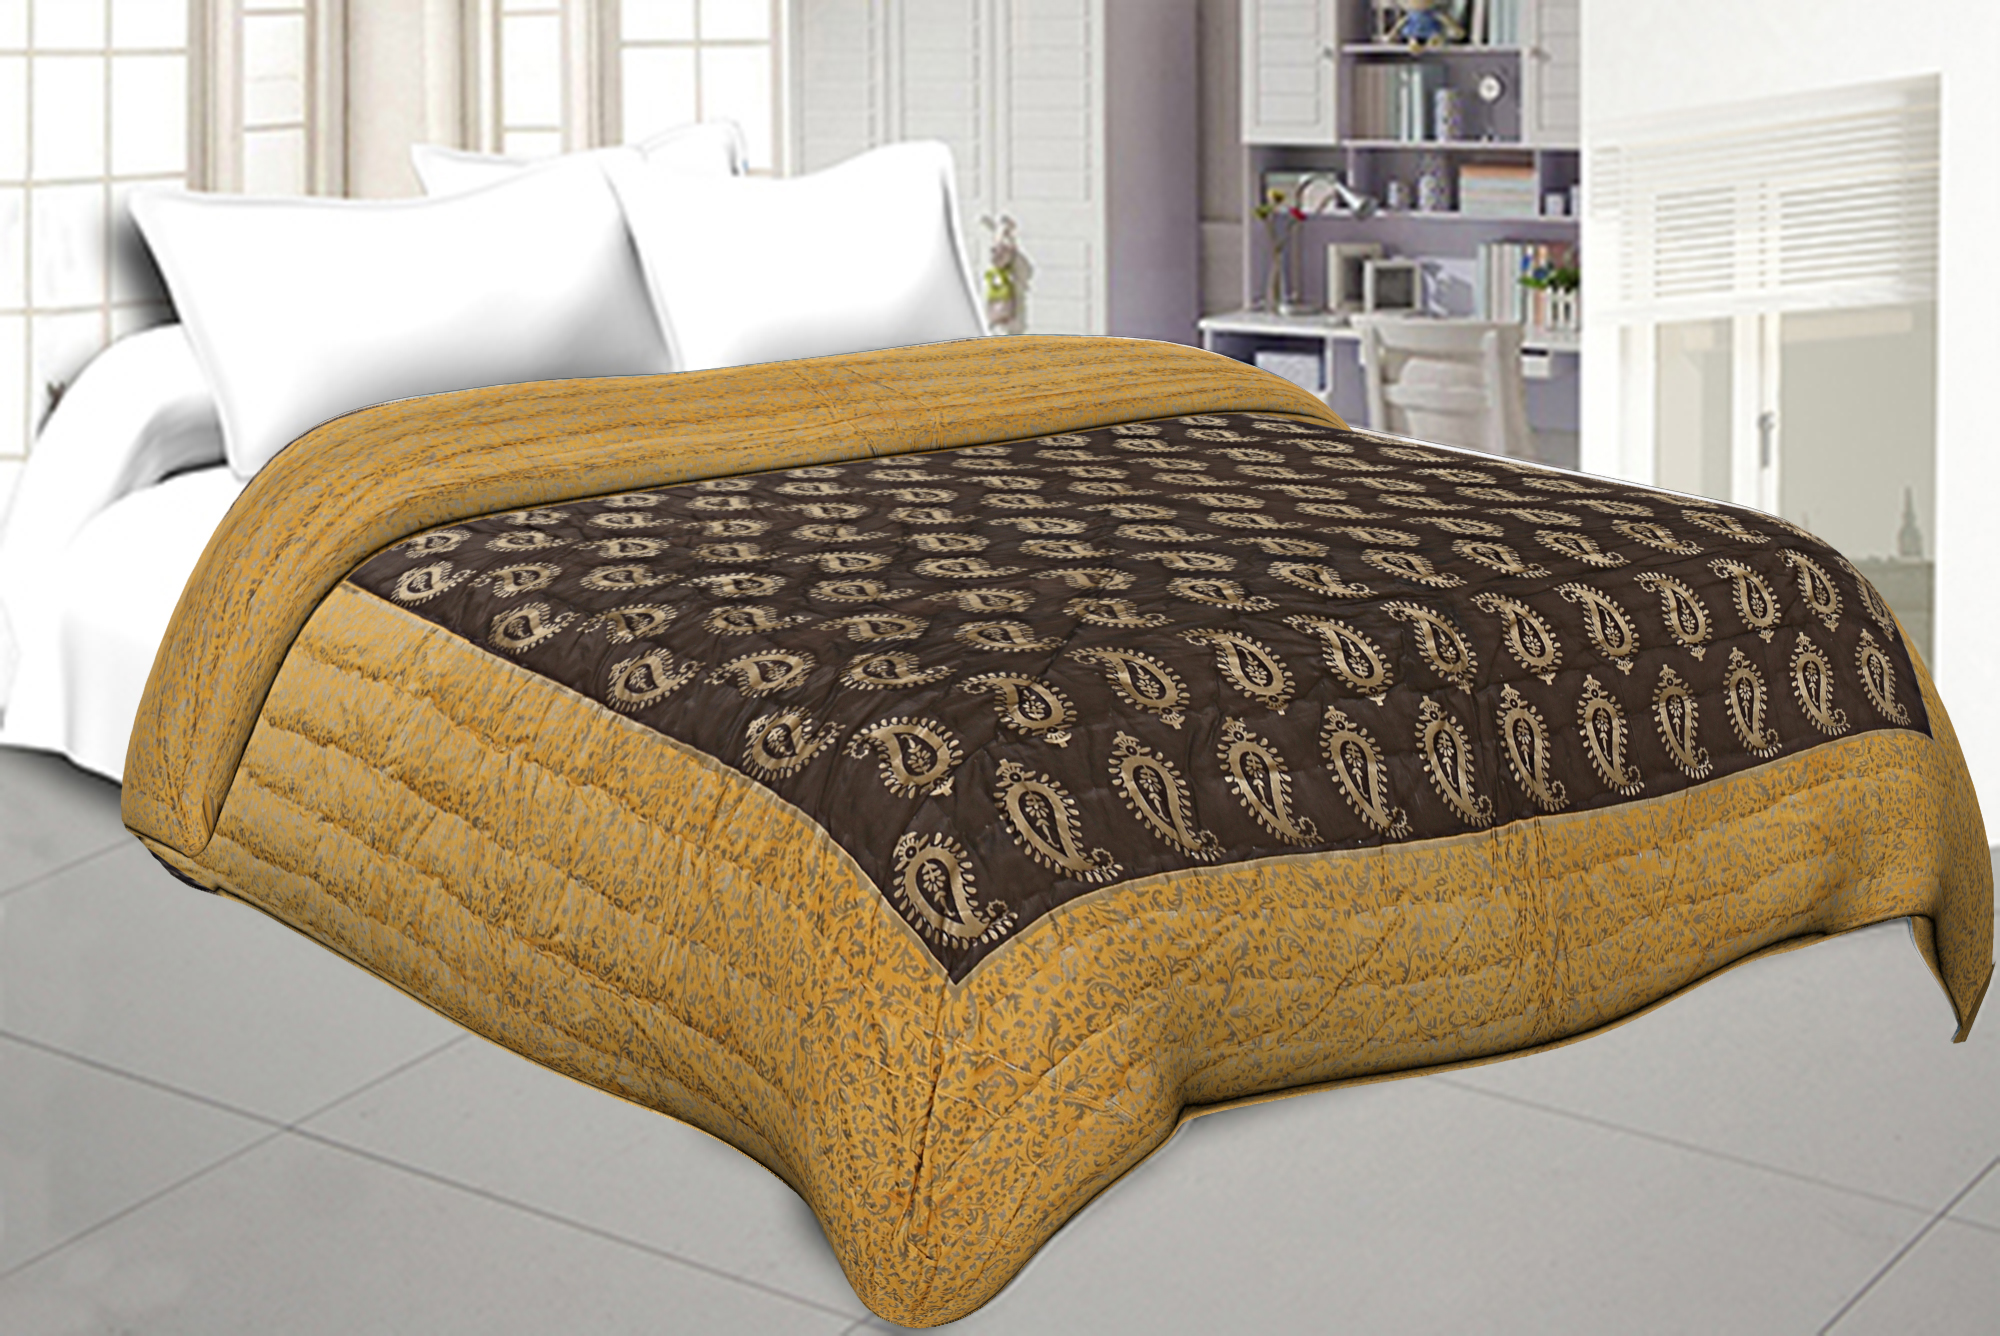 Jaipuri Printed Double Bed Razai Golden Yellow and black with Paisley pattern